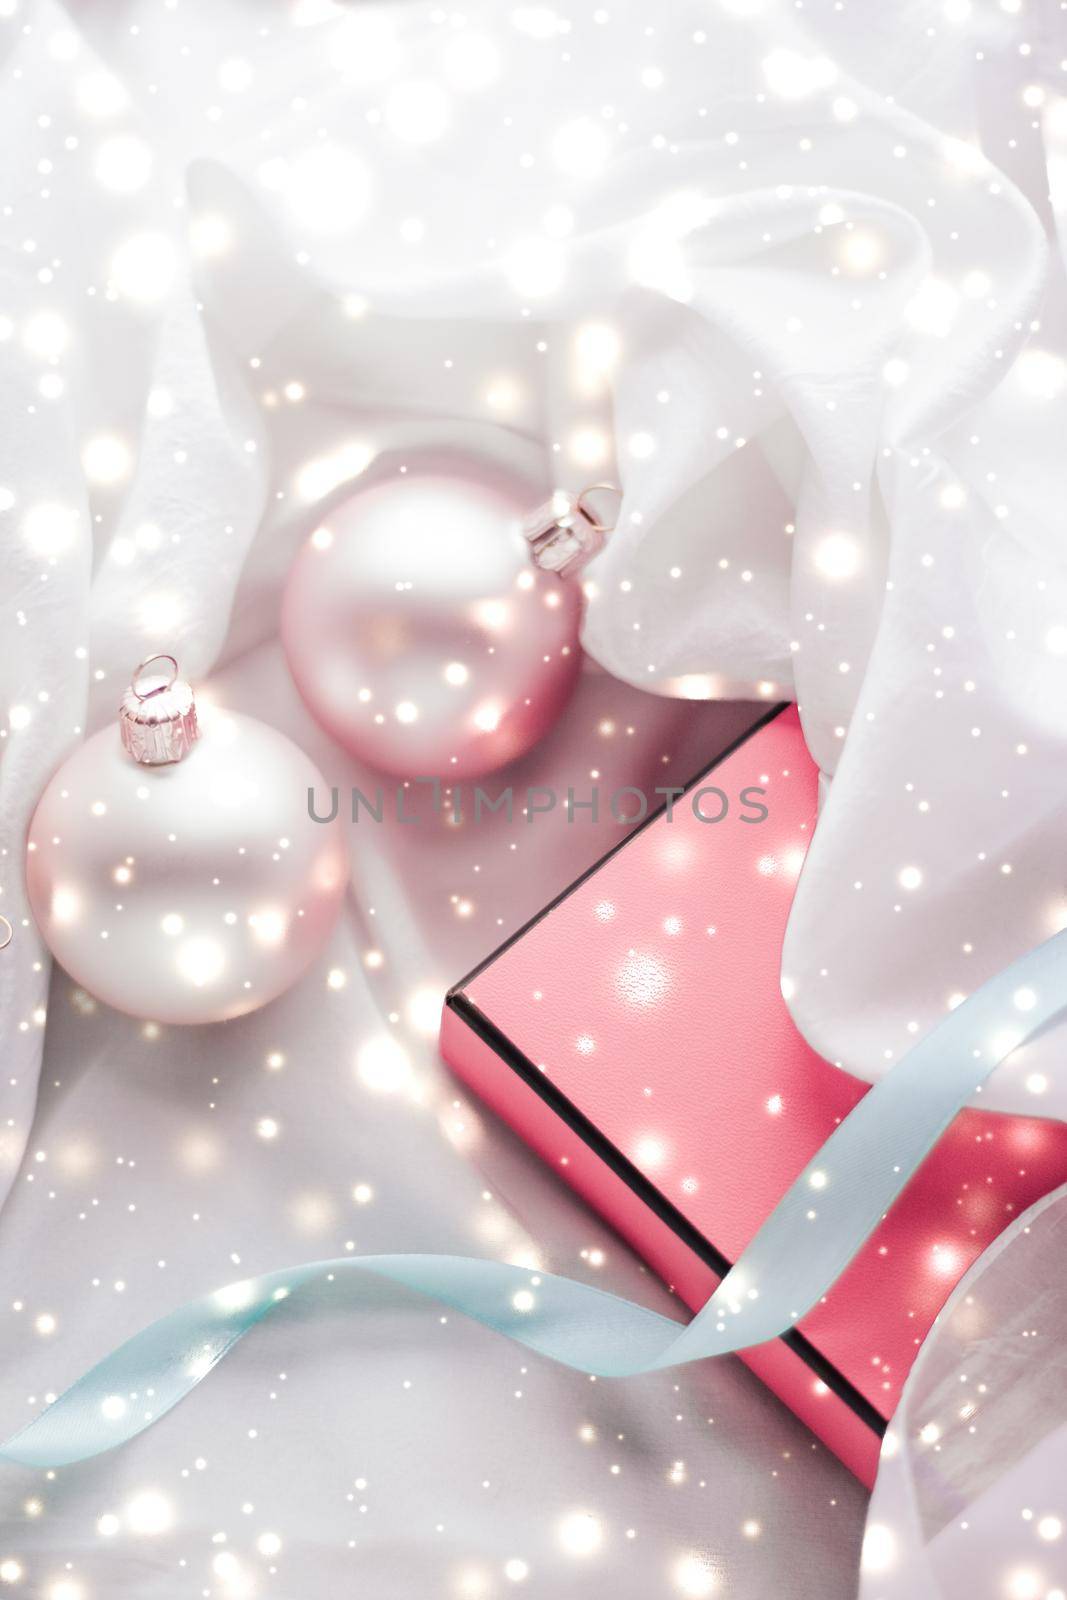 Winter, celebration and new years eve concept - Christmas decoration and gift box with shiny snow on silk background, holiday season